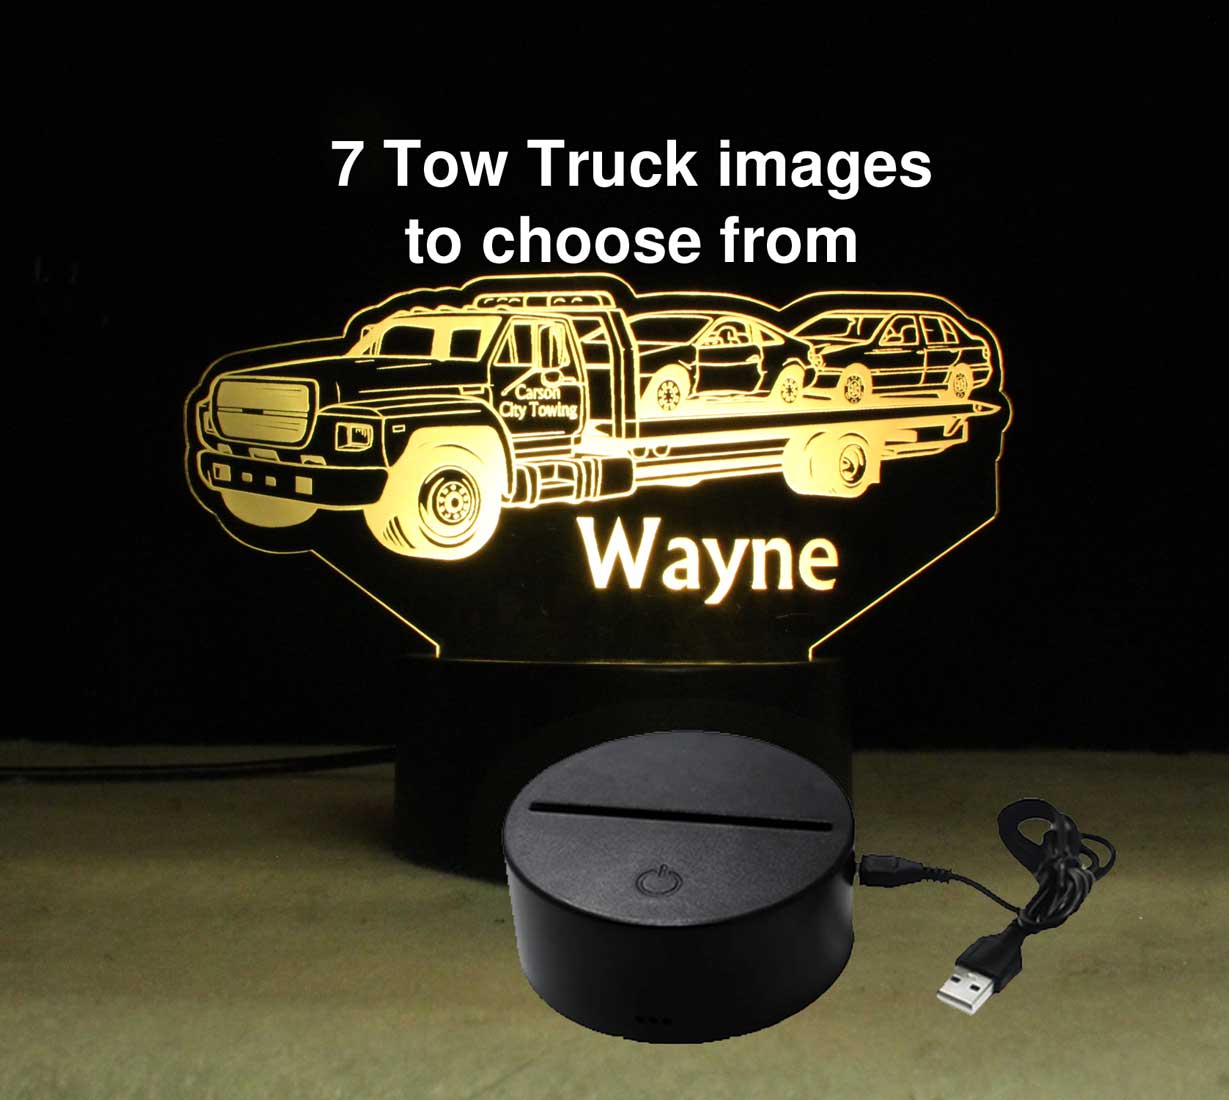 Personalized Tow Truck night light, USB/110V battery operated